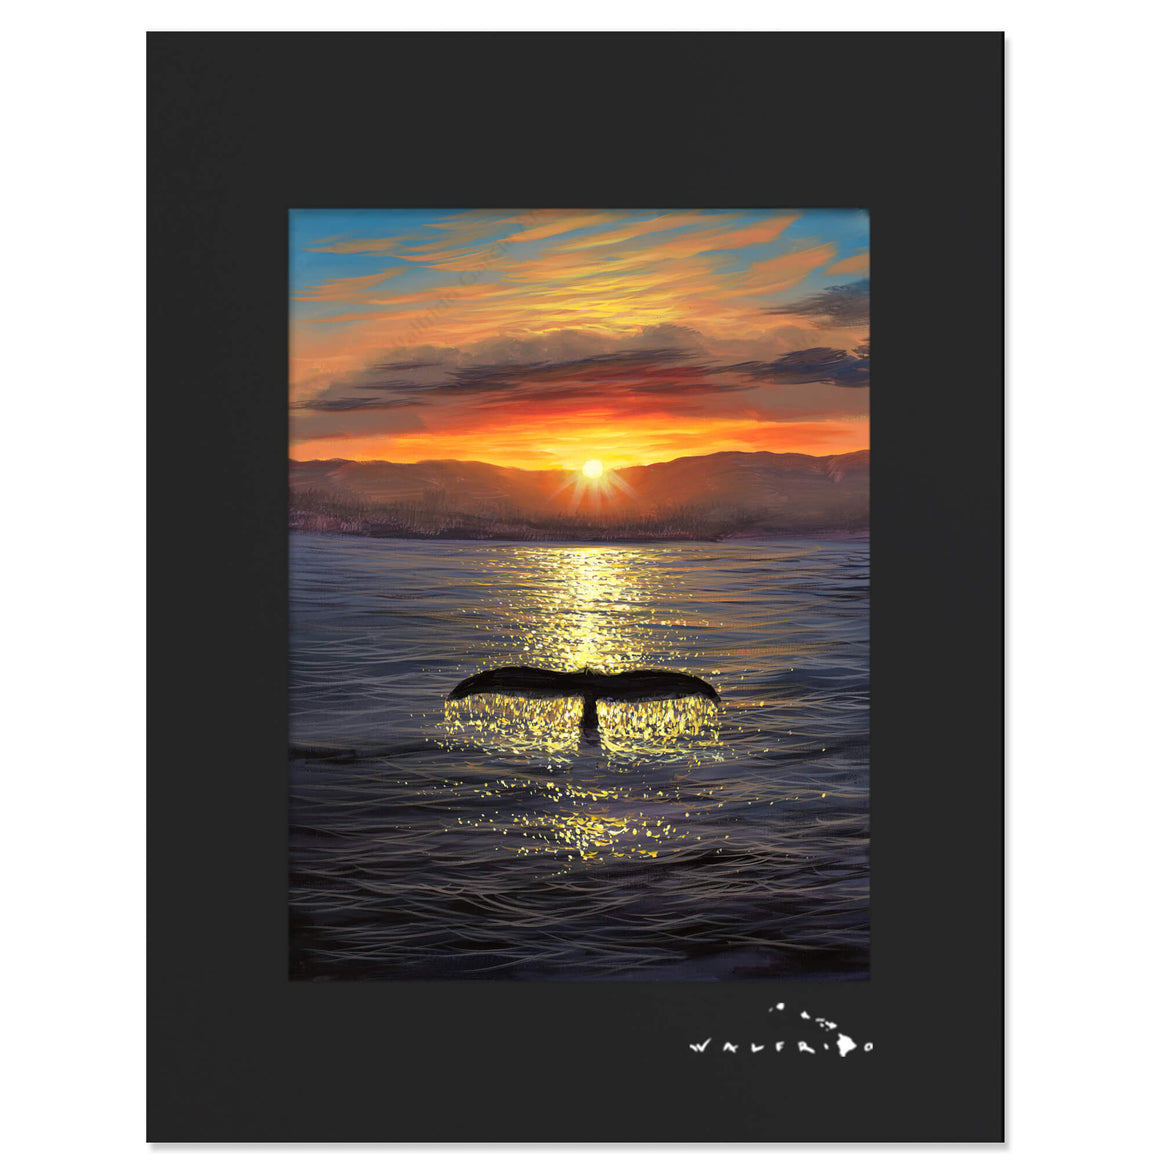 Artistic matted art print rendering a humpback whale's tail fluke diving into a calm Alaskan lake at sunset, amidst reflections of the vivid evening sky by Hawaii artist Walfrido Garcia.